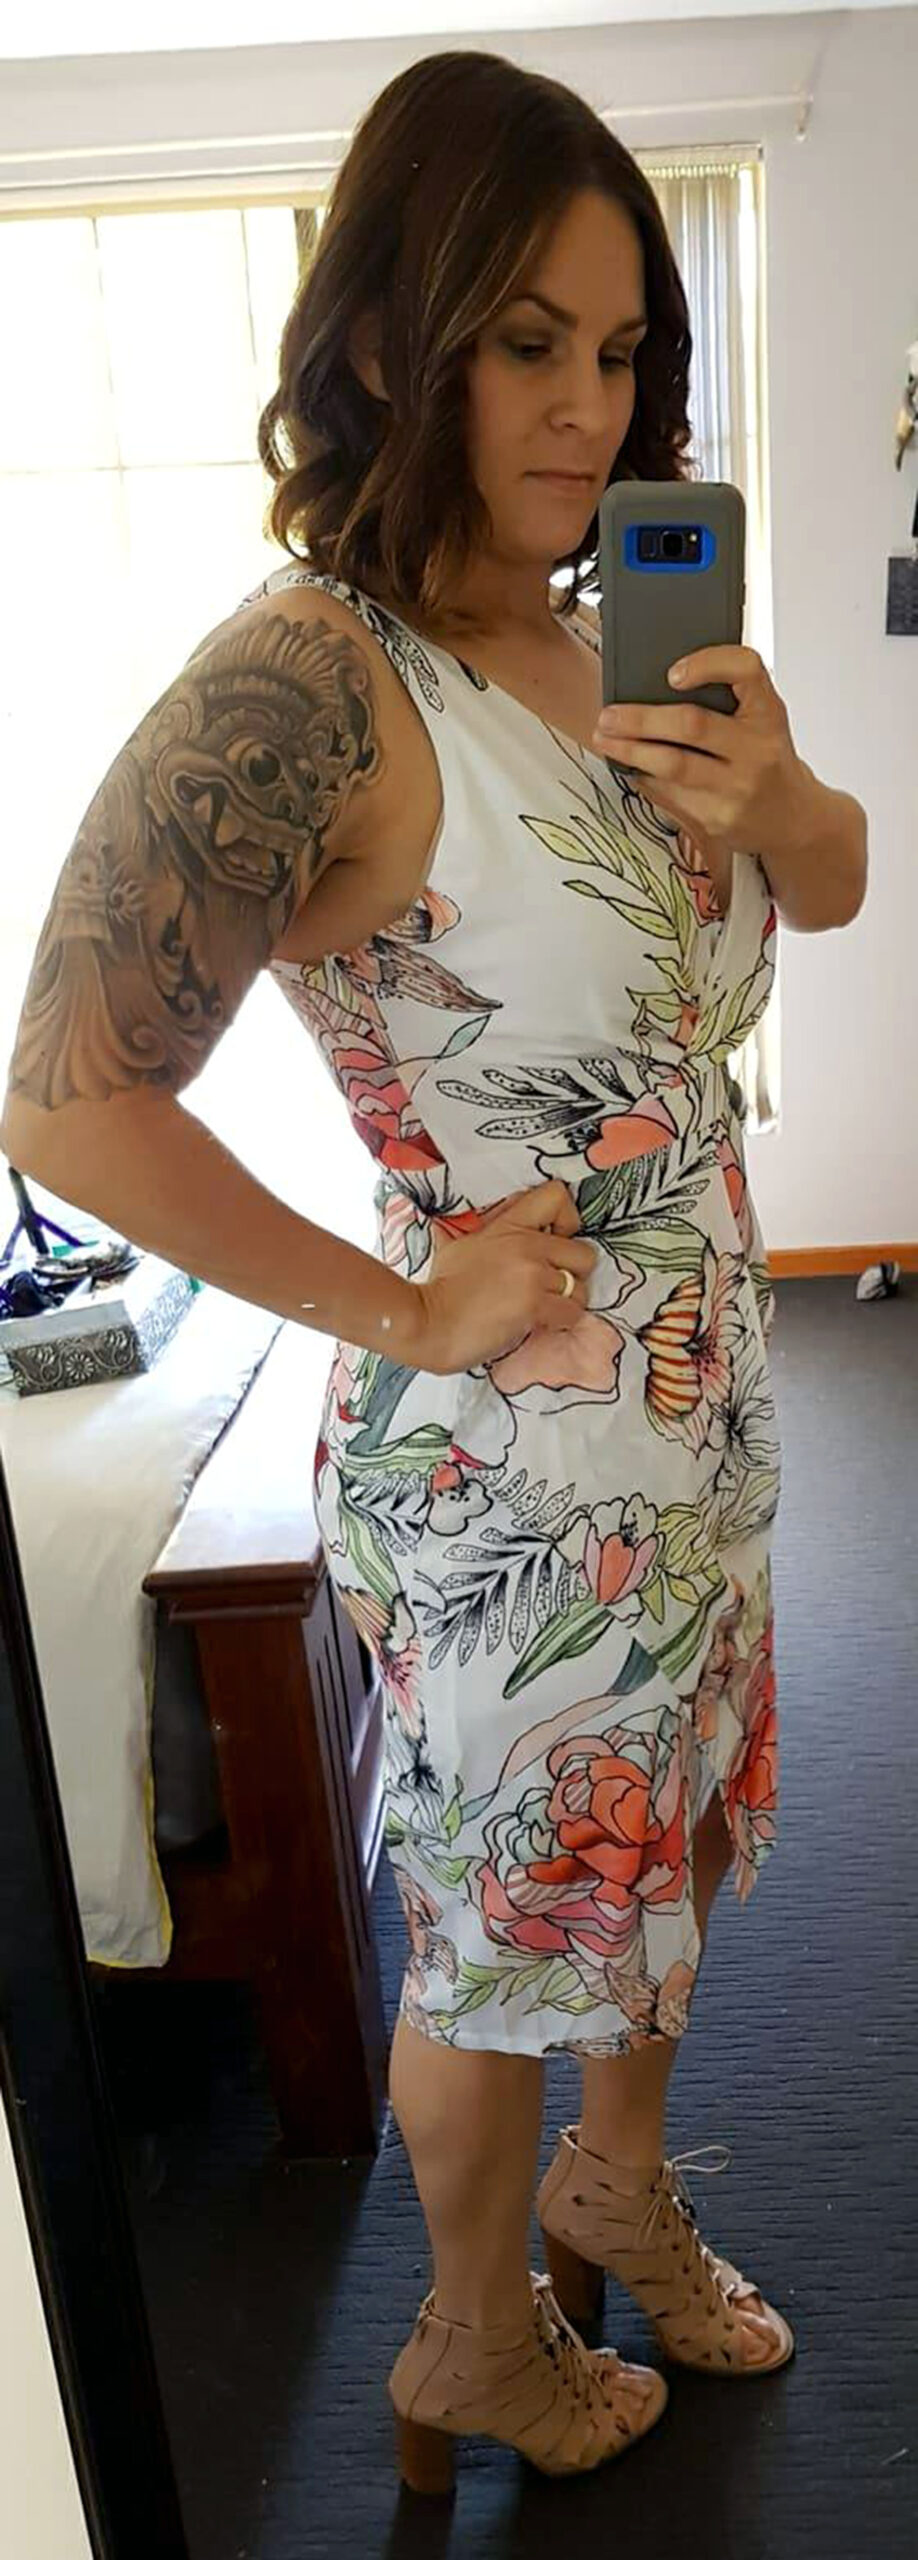 Perth woman loses 56kg after being fat shamed in Bali